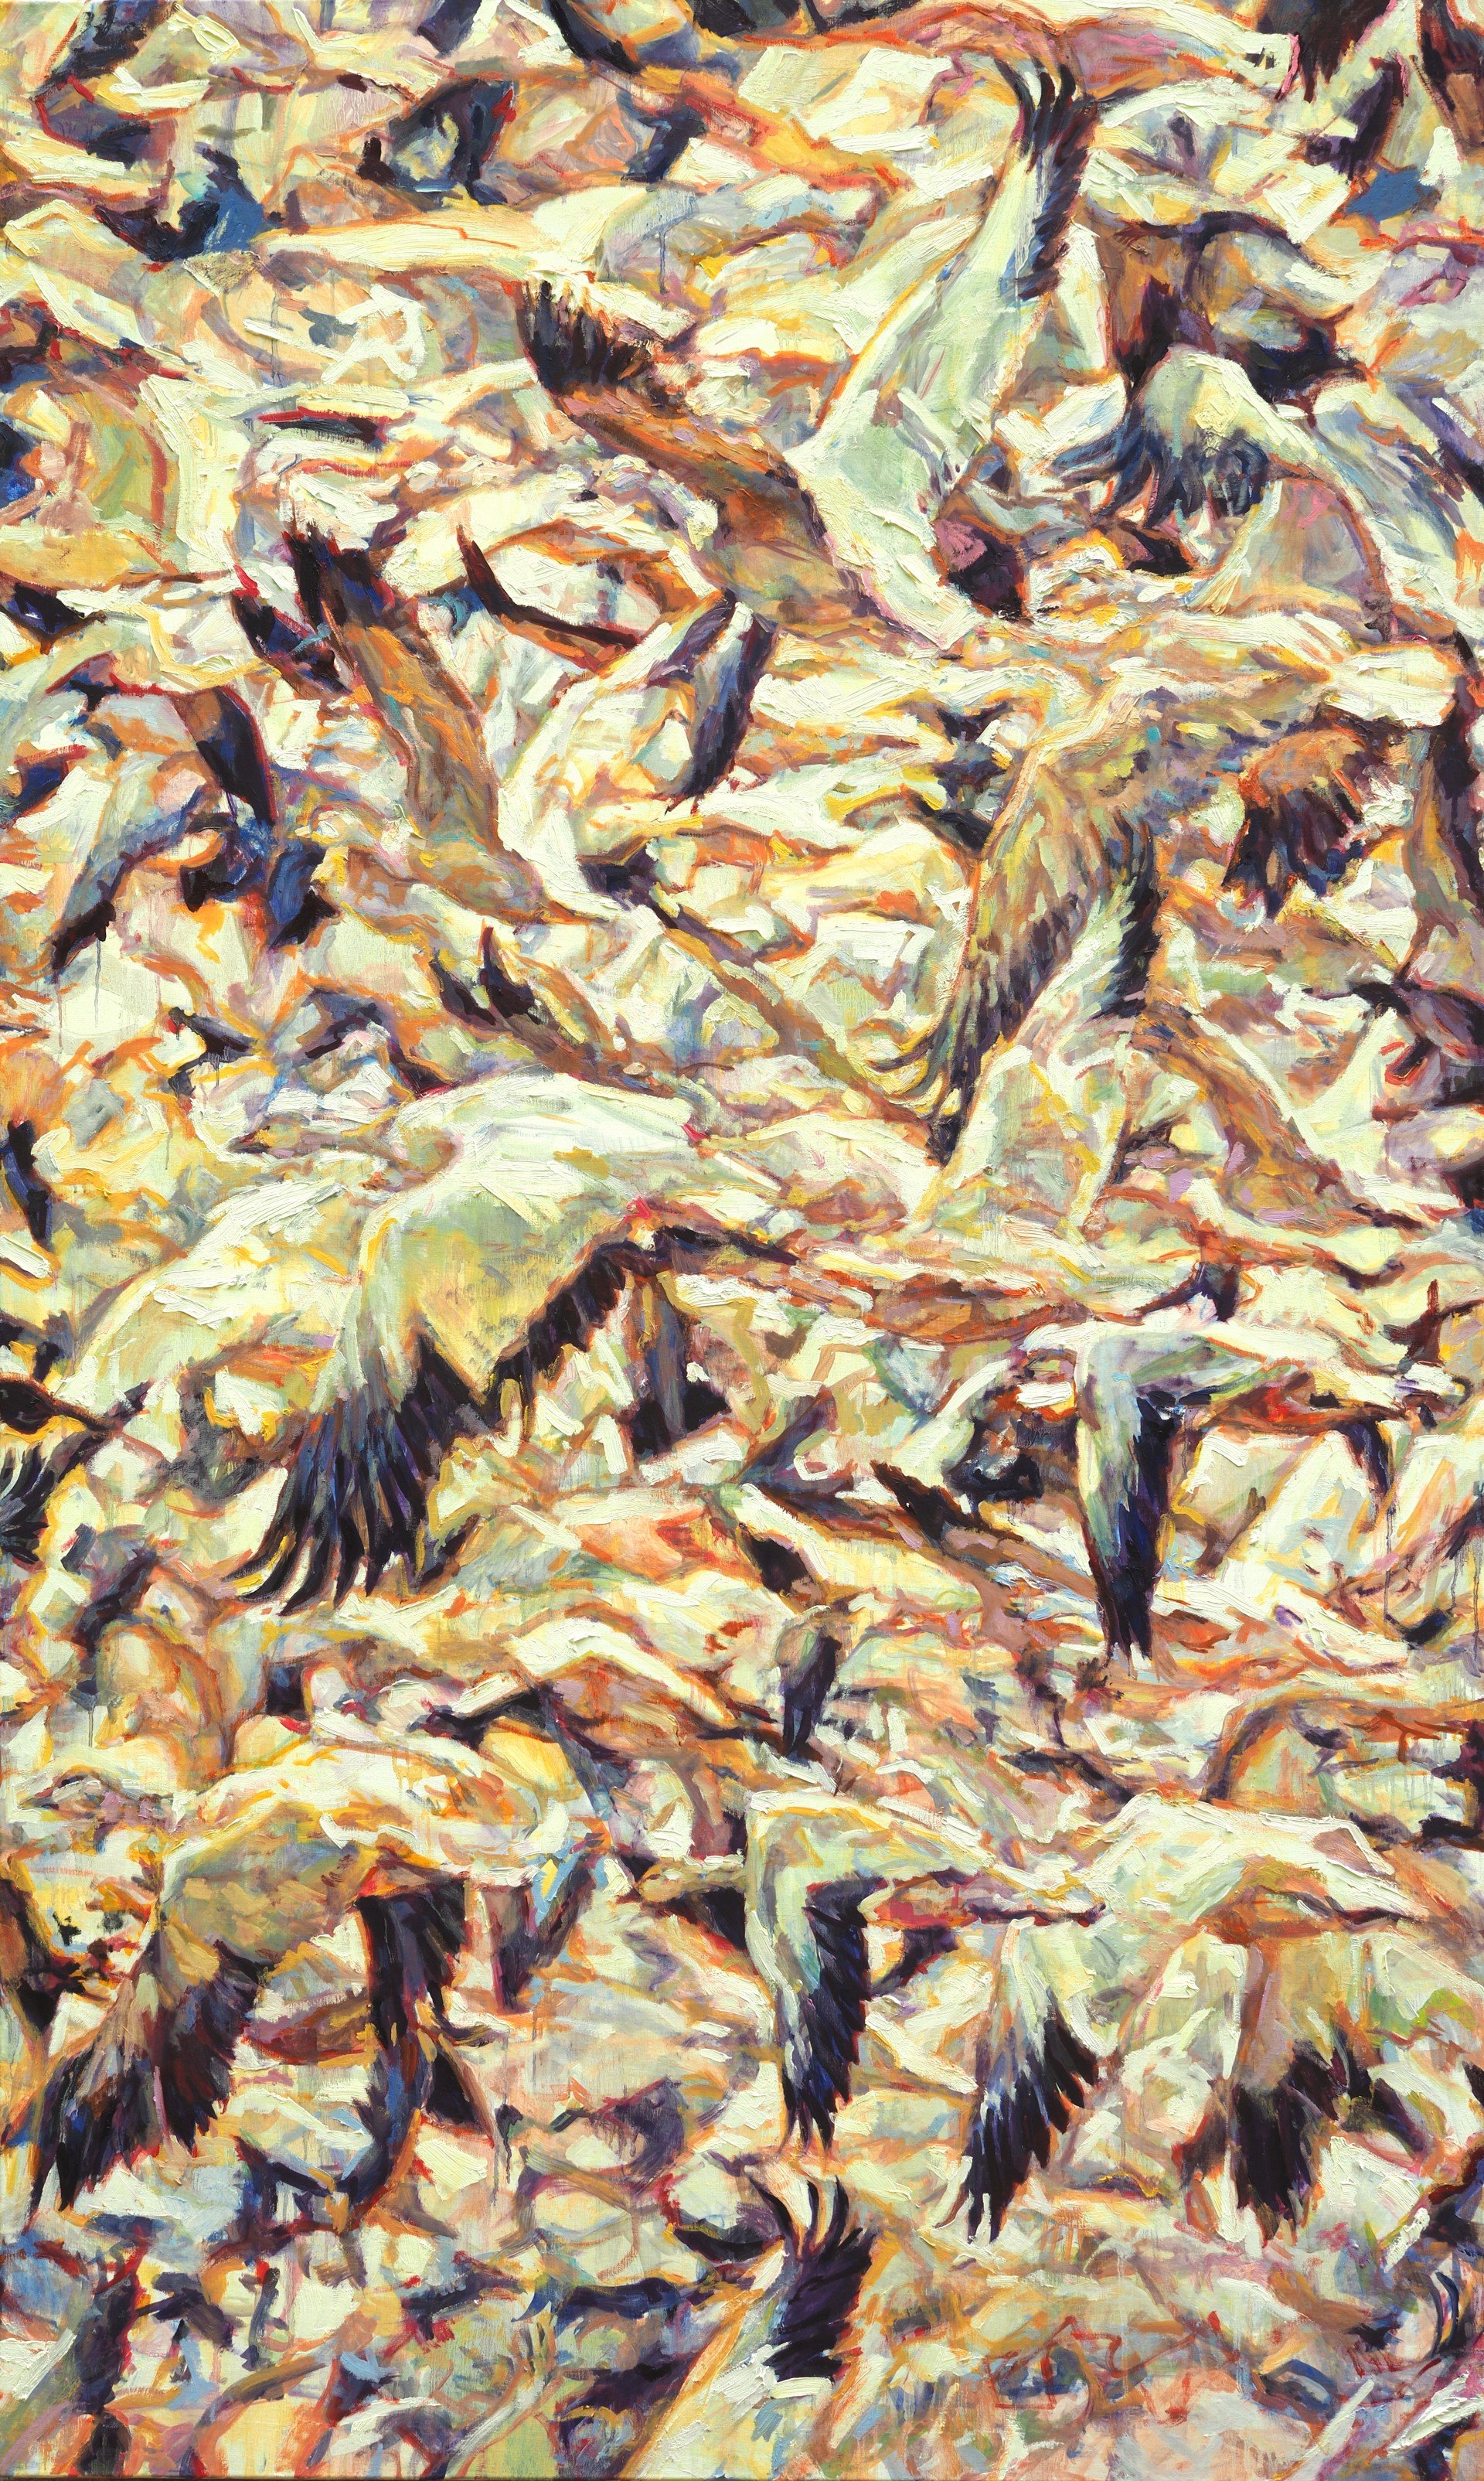 A Contemporary Triptych Oil Painting Of A Large Flock Of Snow Geese Taking Off In Flight, By Patricia Griffin